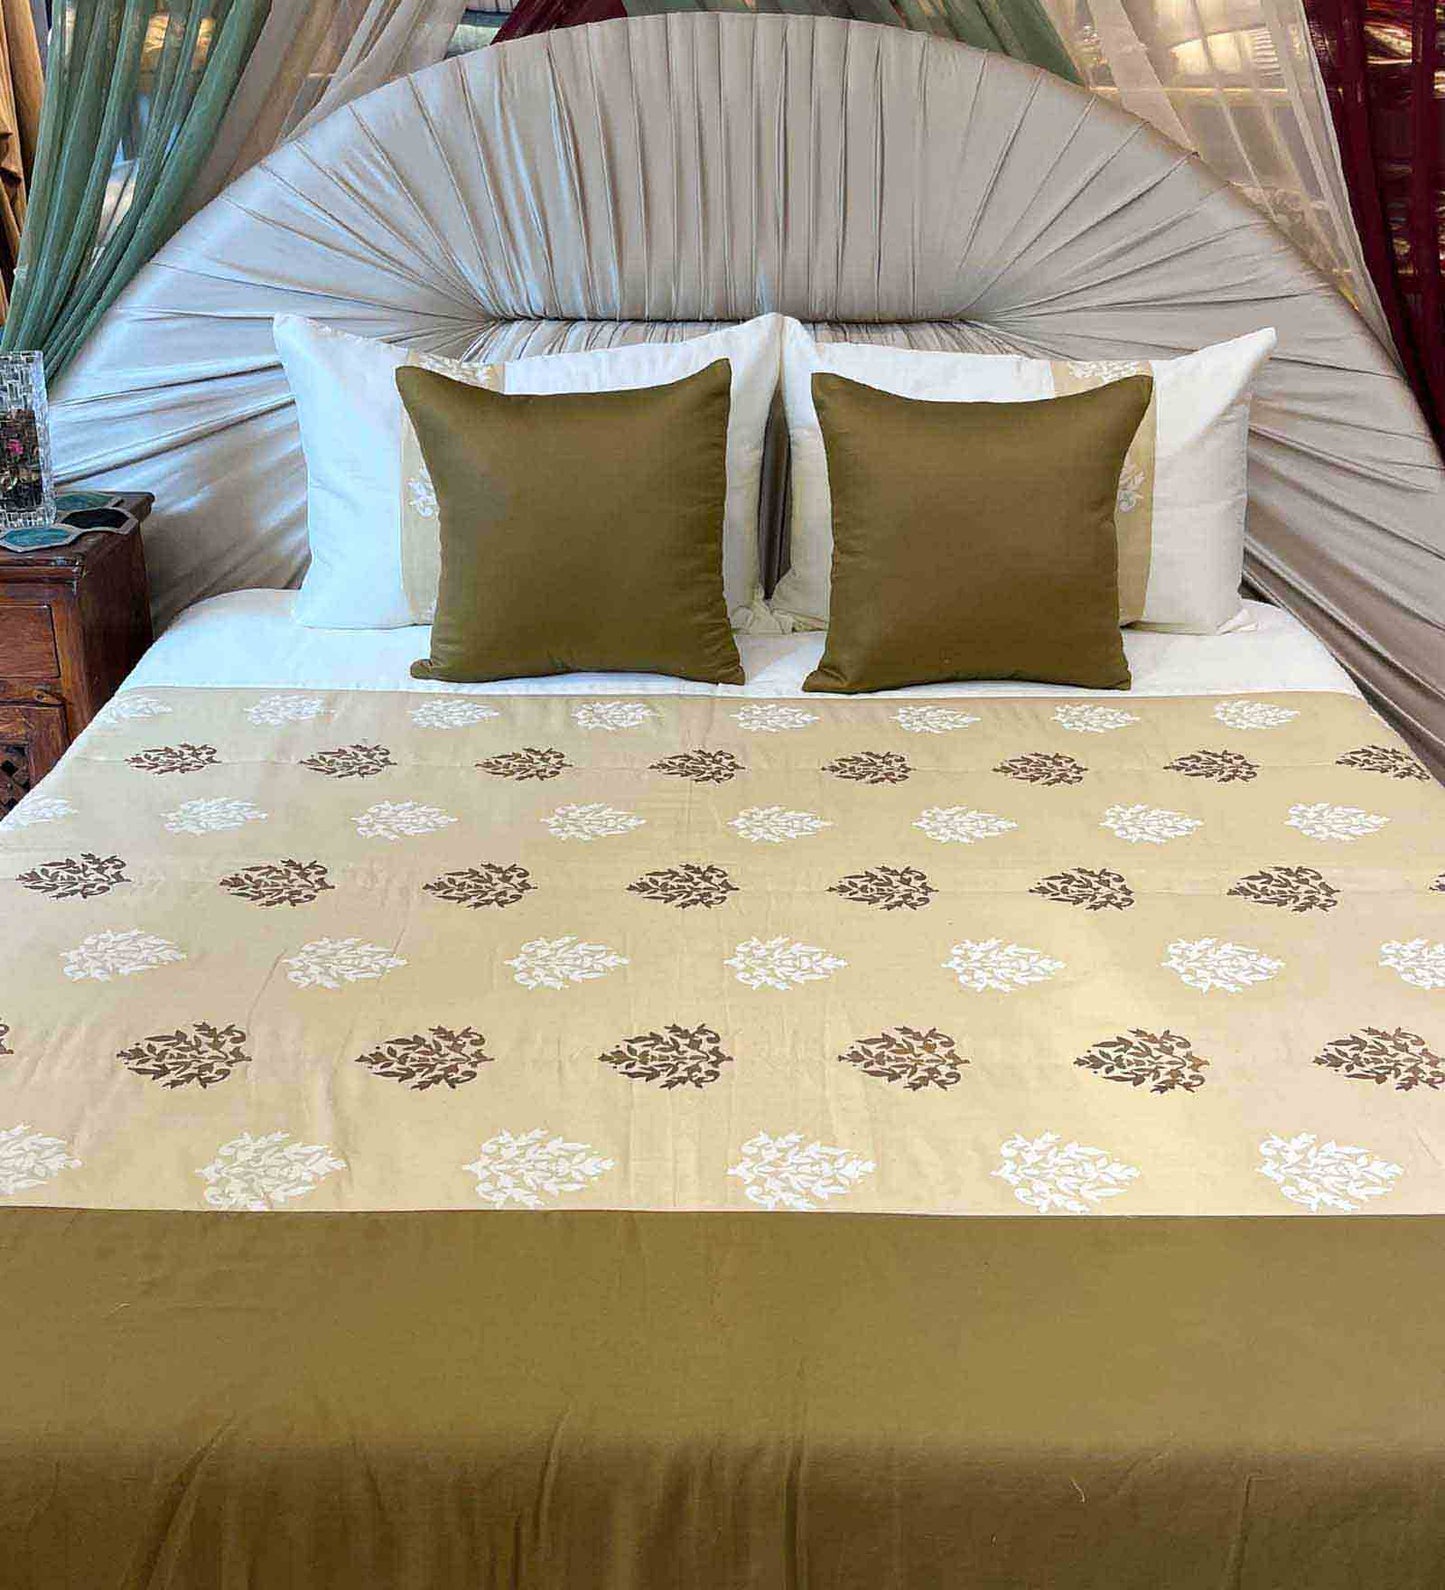 Aleppo Bed Covers Set - King Size